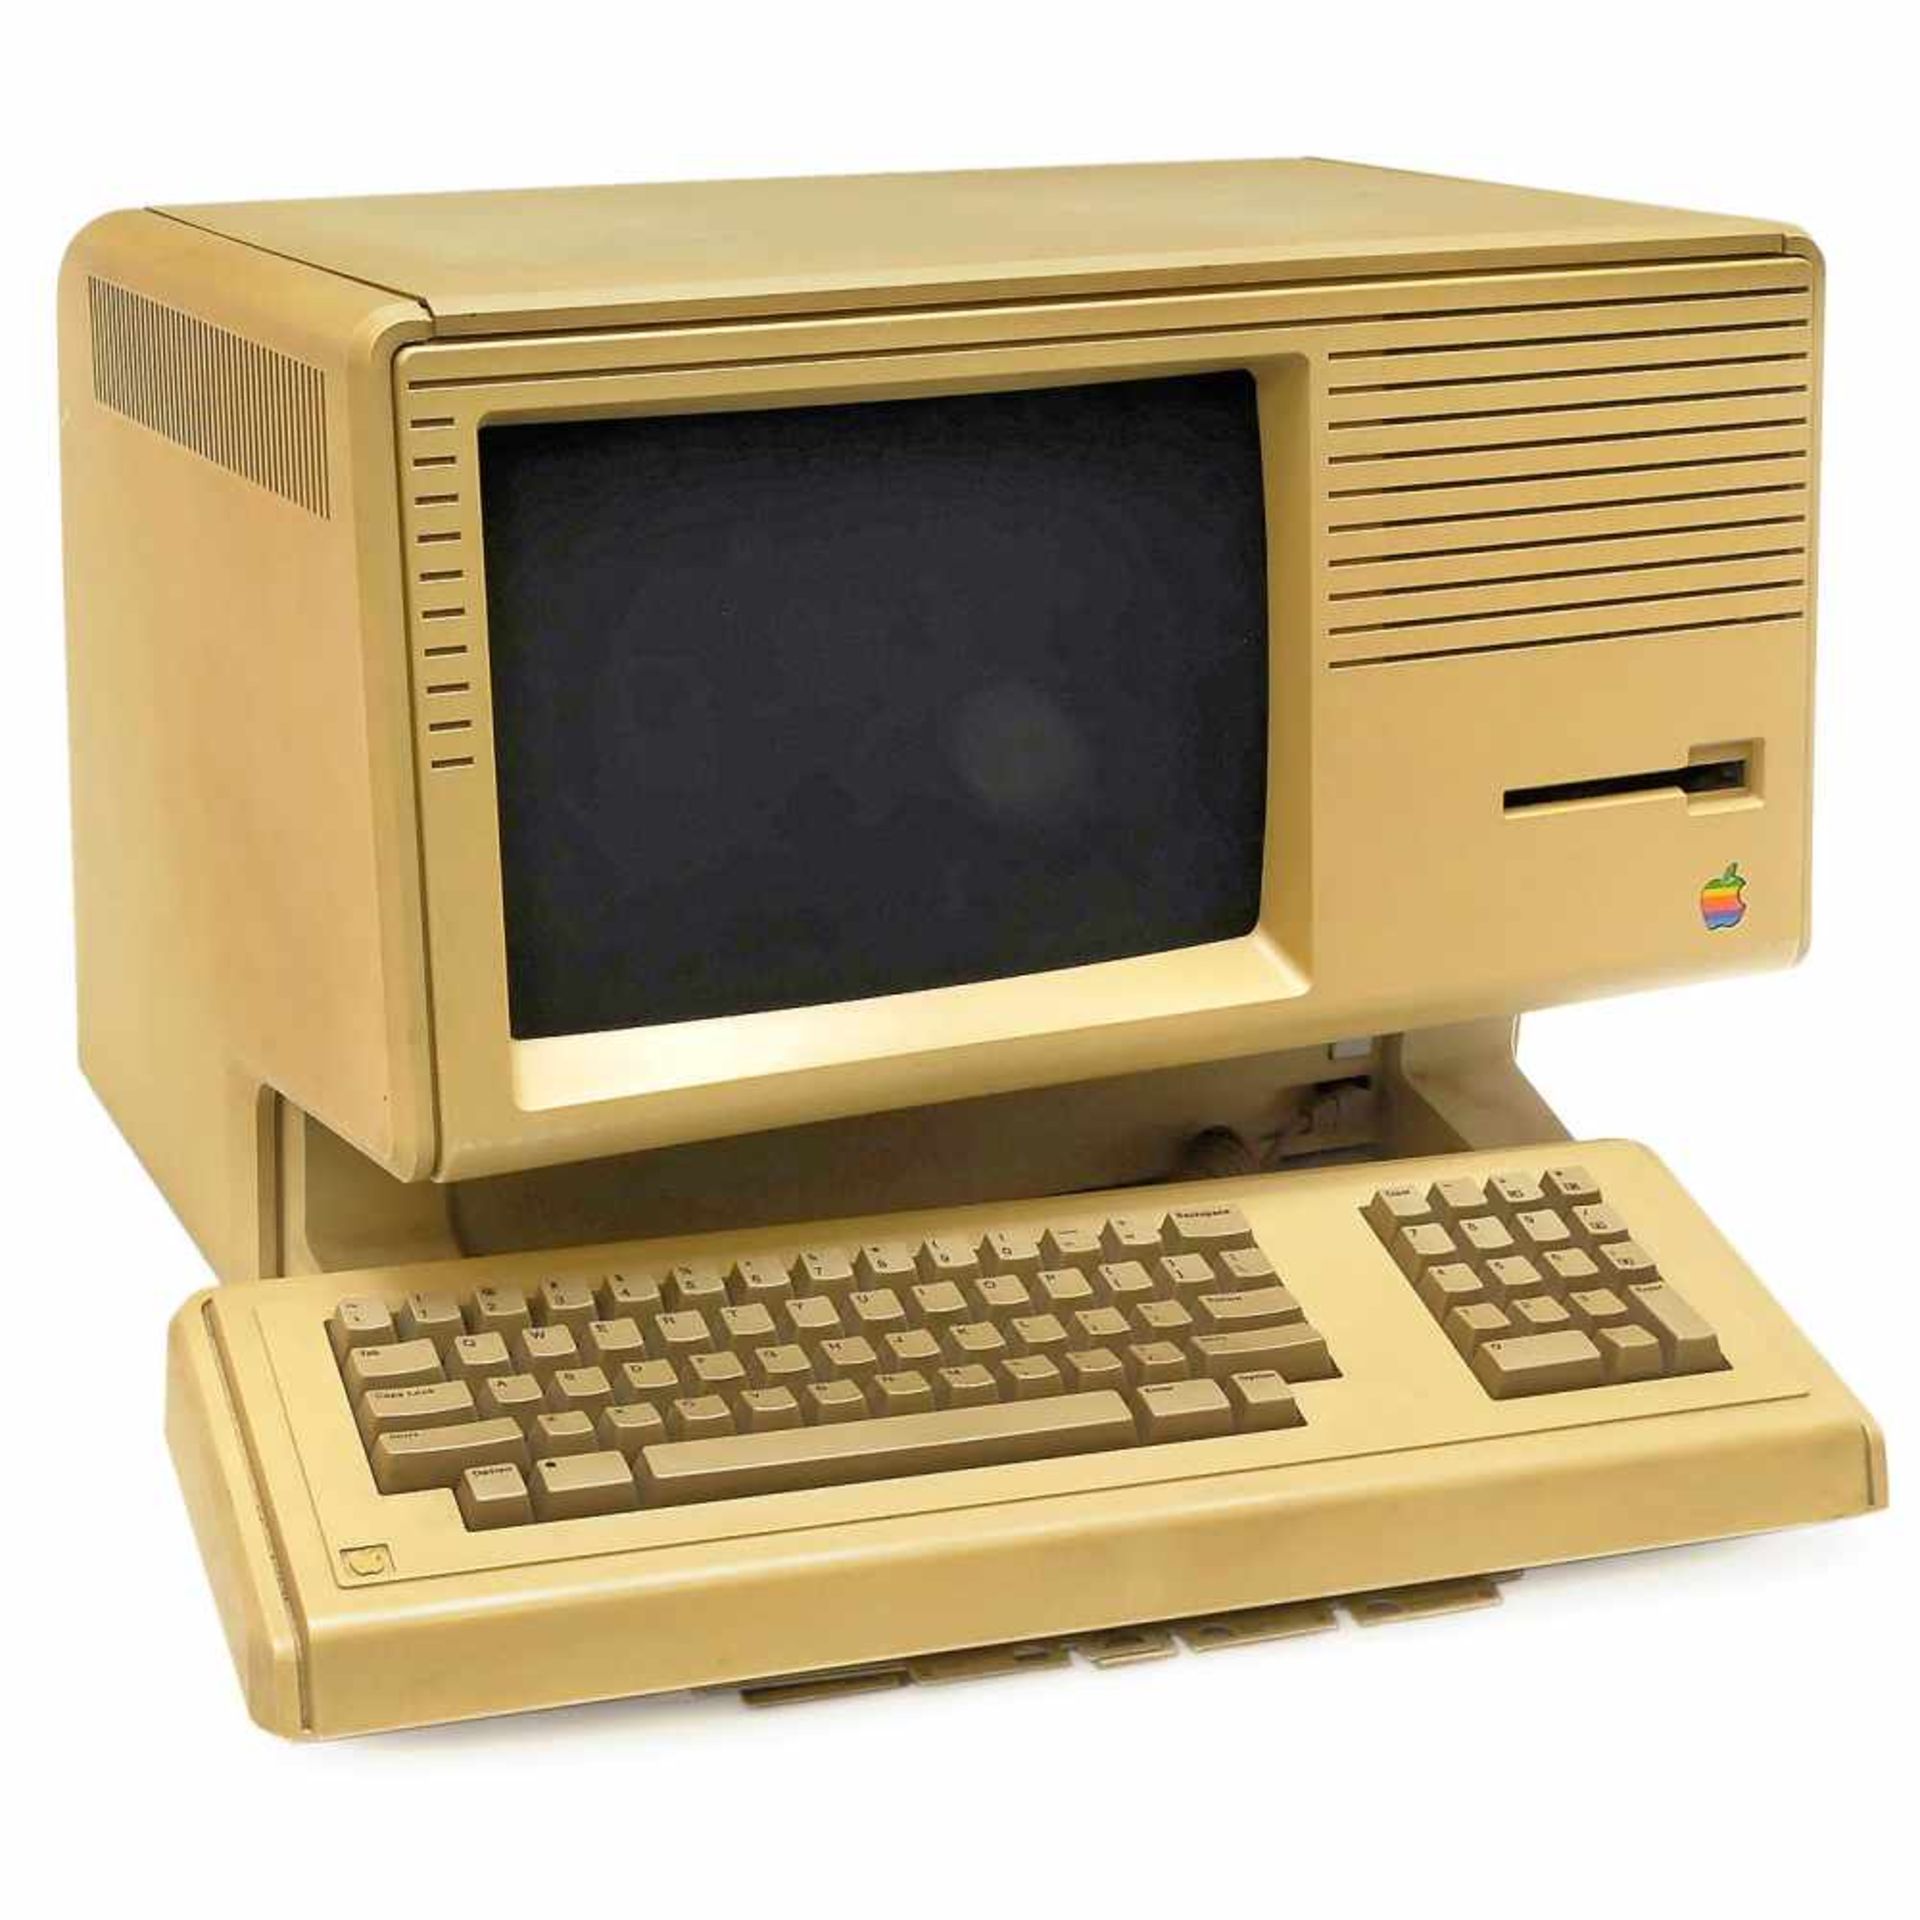 Apple Lisa-2, 1984This was the second, technically revised version of the first personal computer